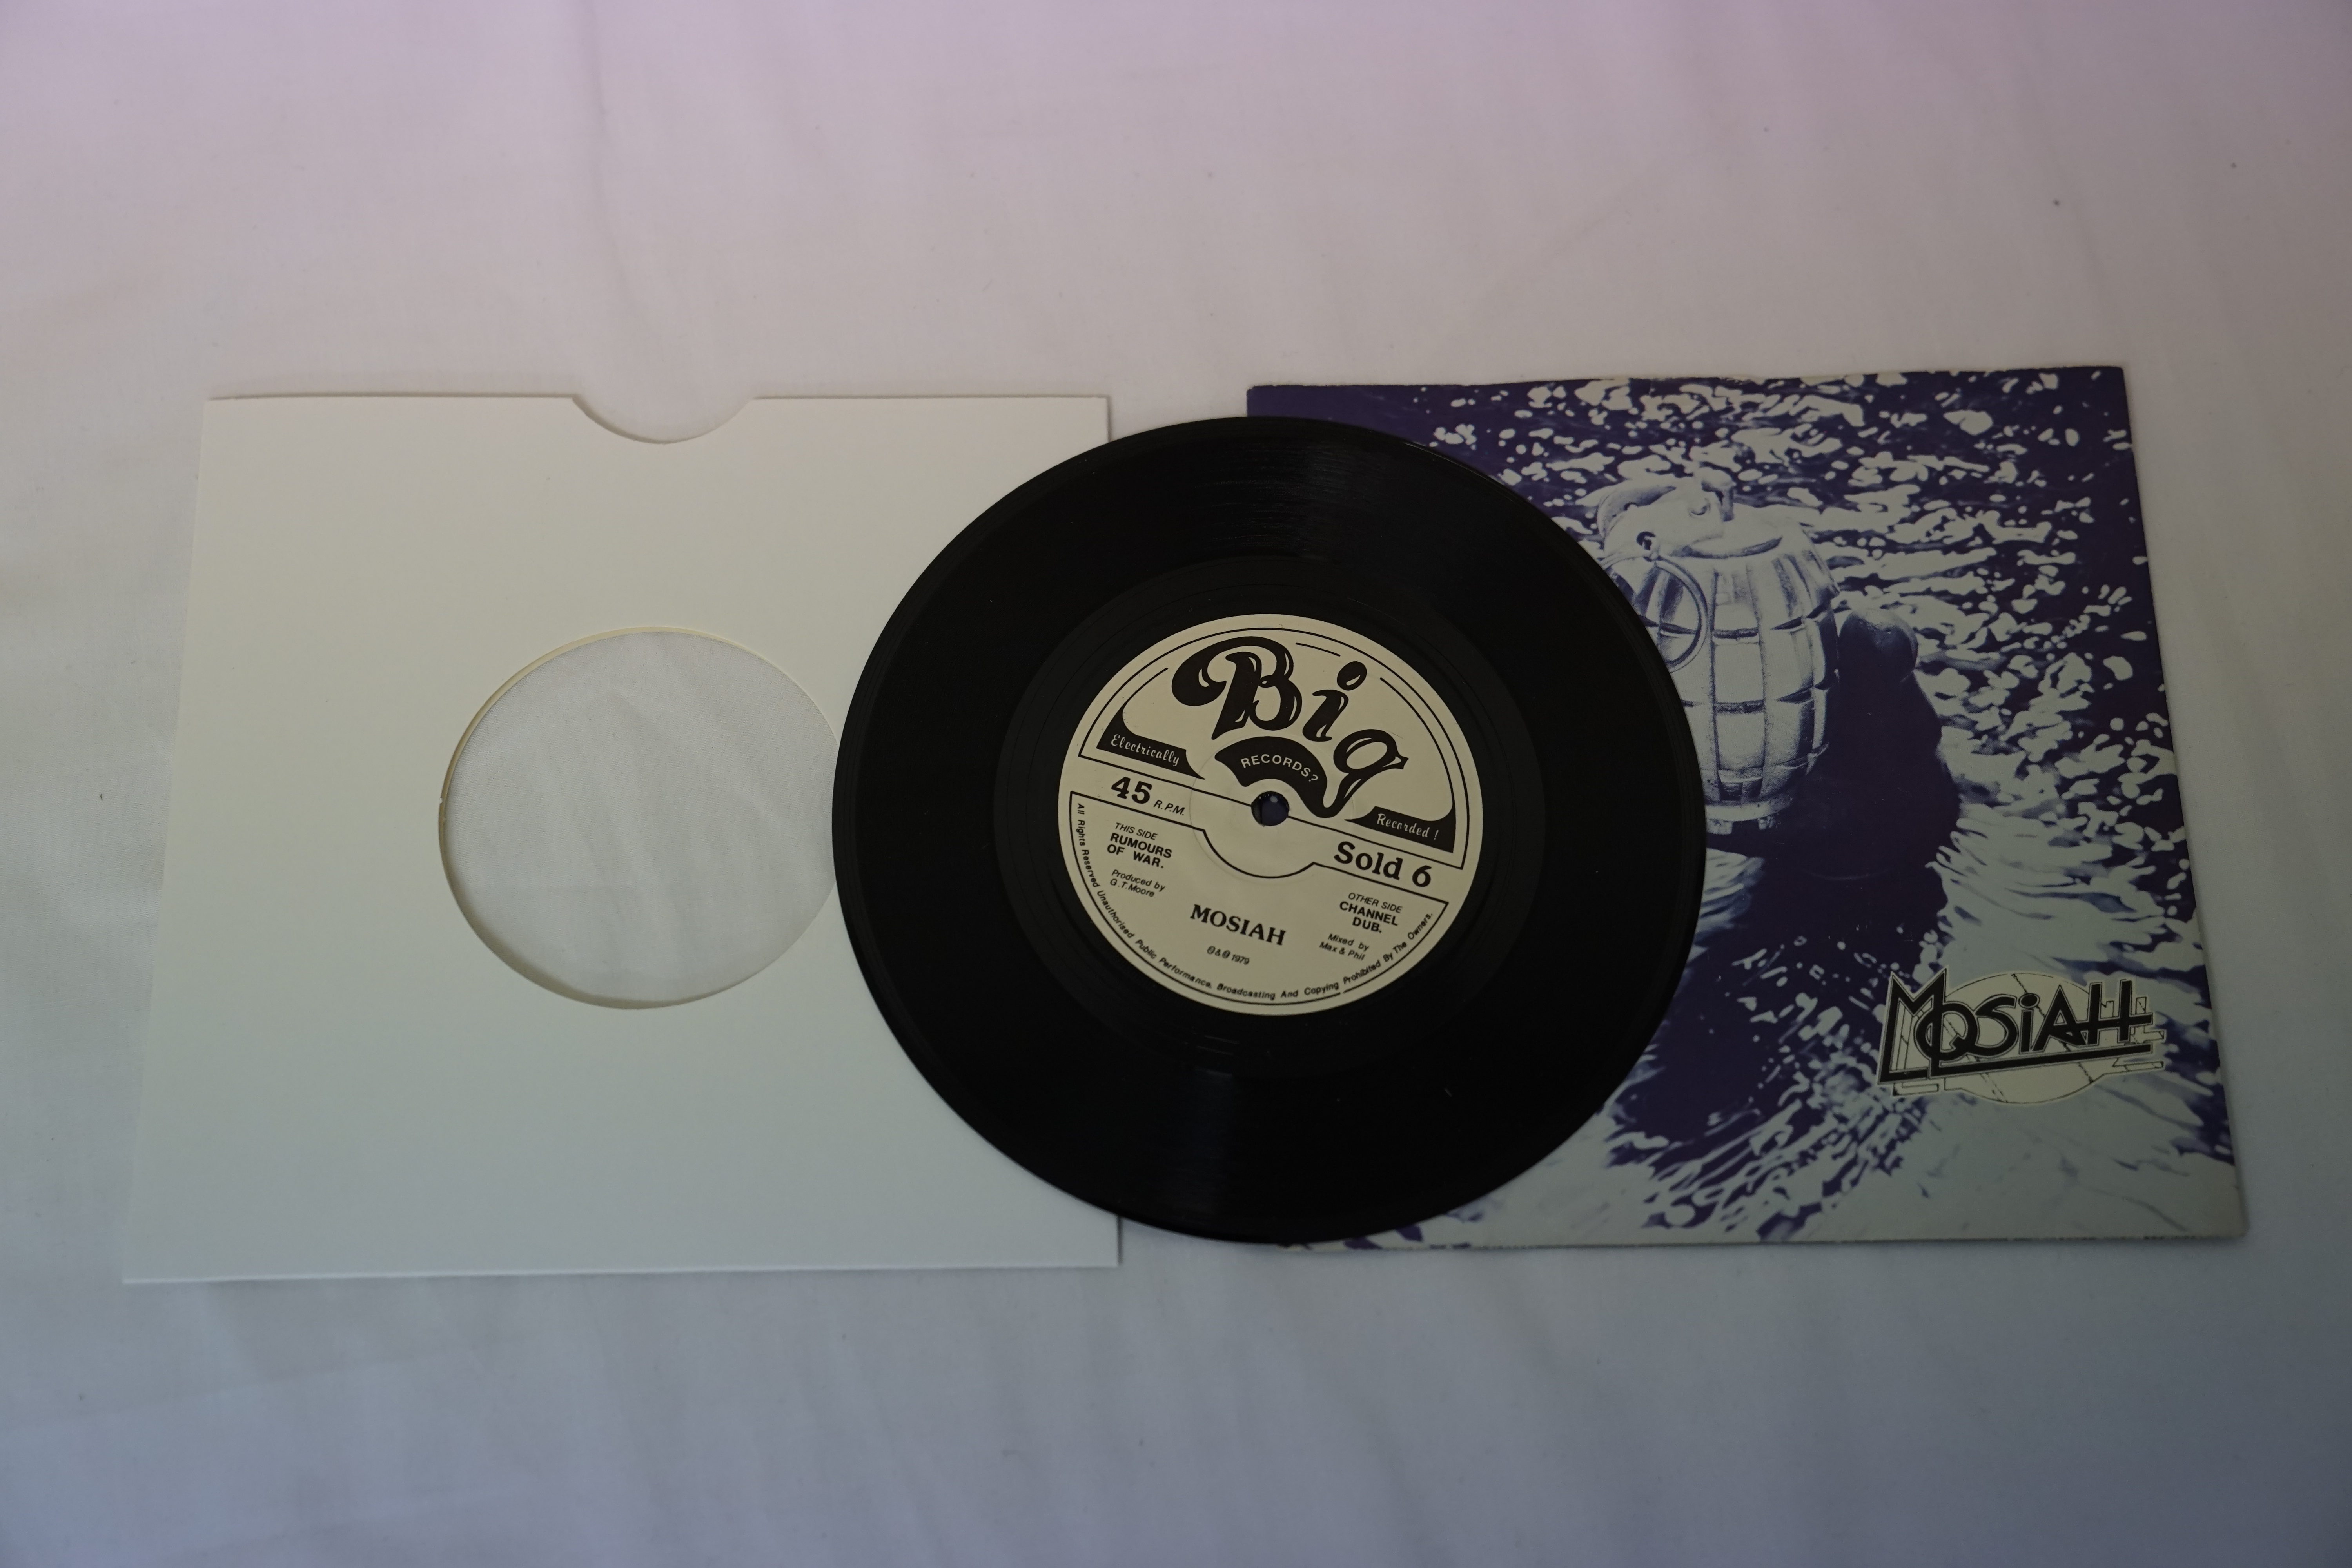 Vinyl - Mosiah - Channel Dub / Rumours Of War (Big Records SOLD 6 DEMO PROMO) NM archive